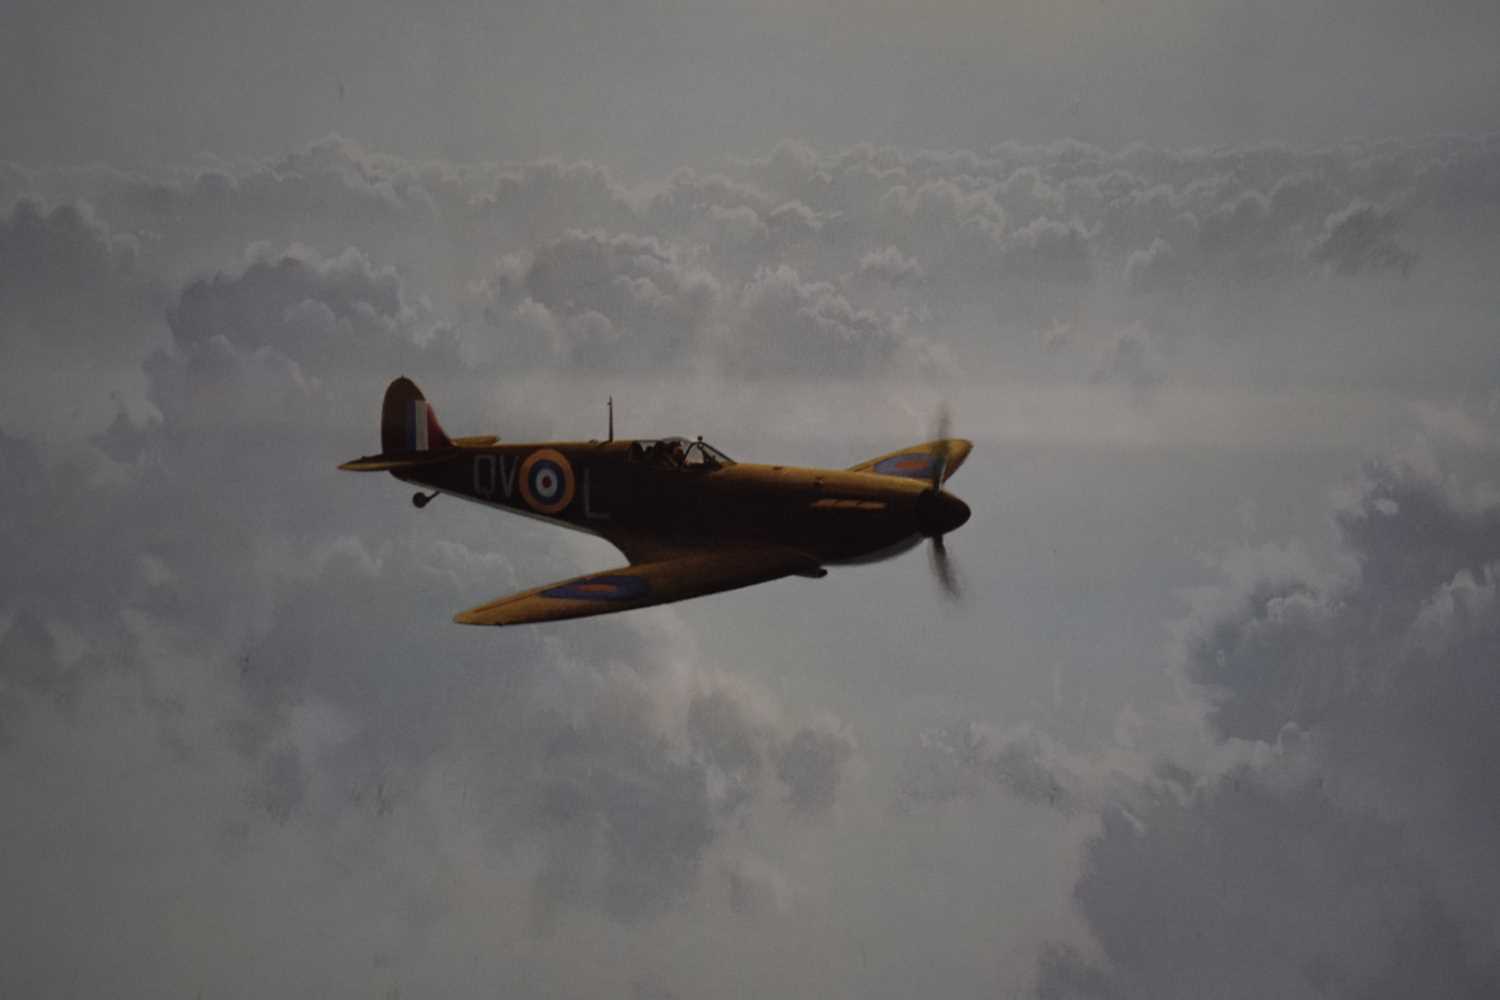 Gerald Coulson 'Solitude' Print of a spitfire. Artist signed to the mount with printers stamp for - Image 3 of 3